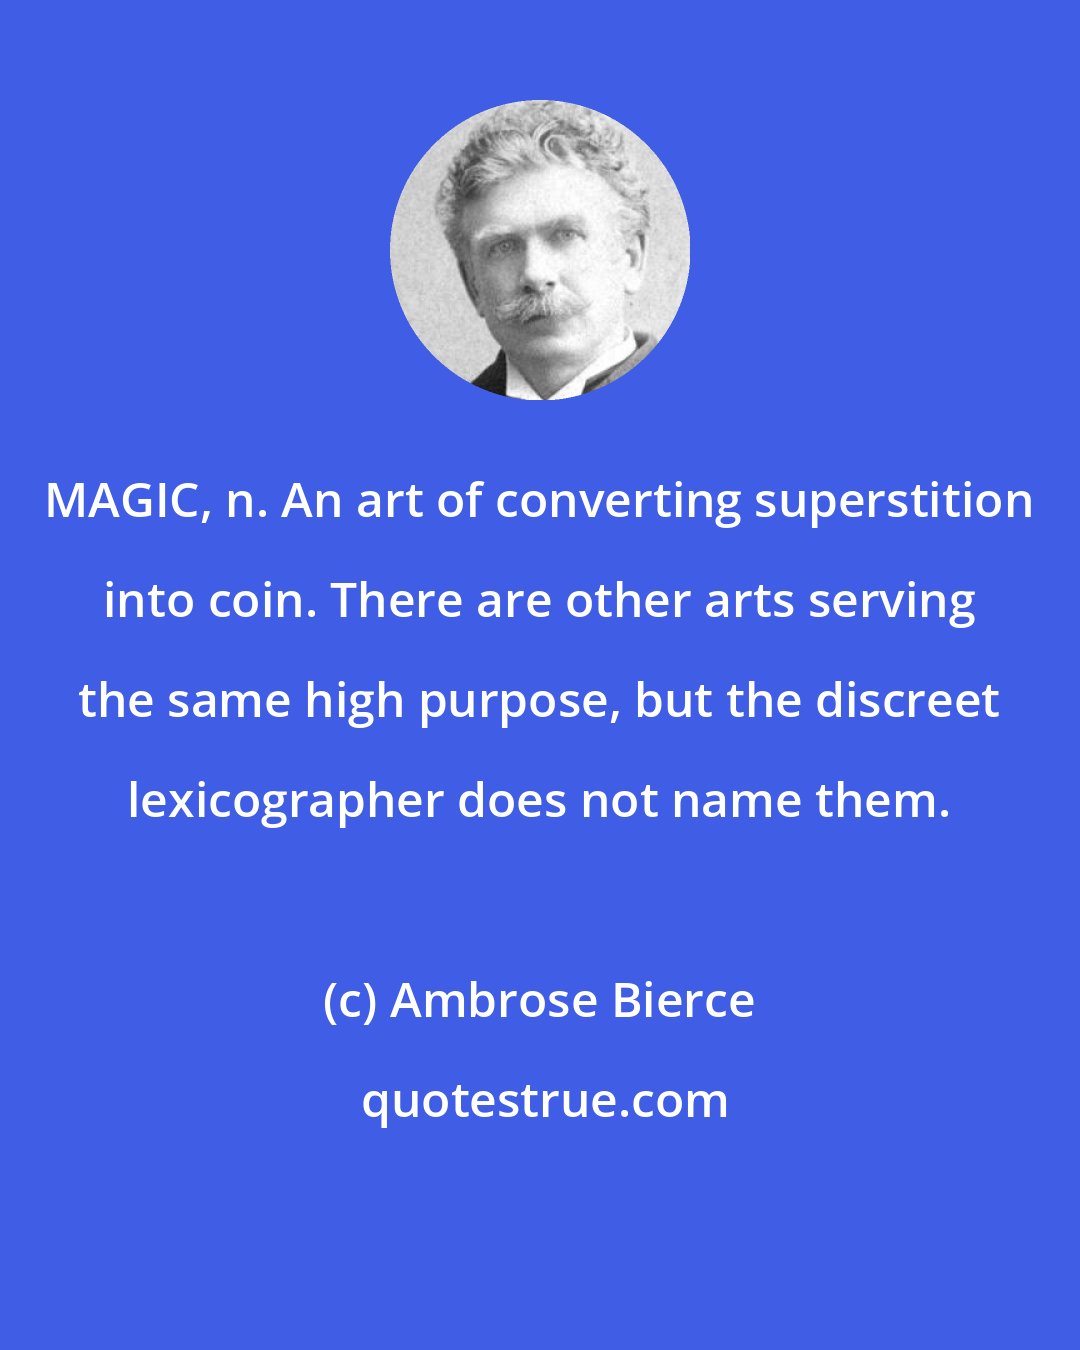 Ambrose Bierce: MAGIC, n. An art of converting superstition into coin. There are other arts serving the same high purpose, but the discreet lexicographer does not name them.